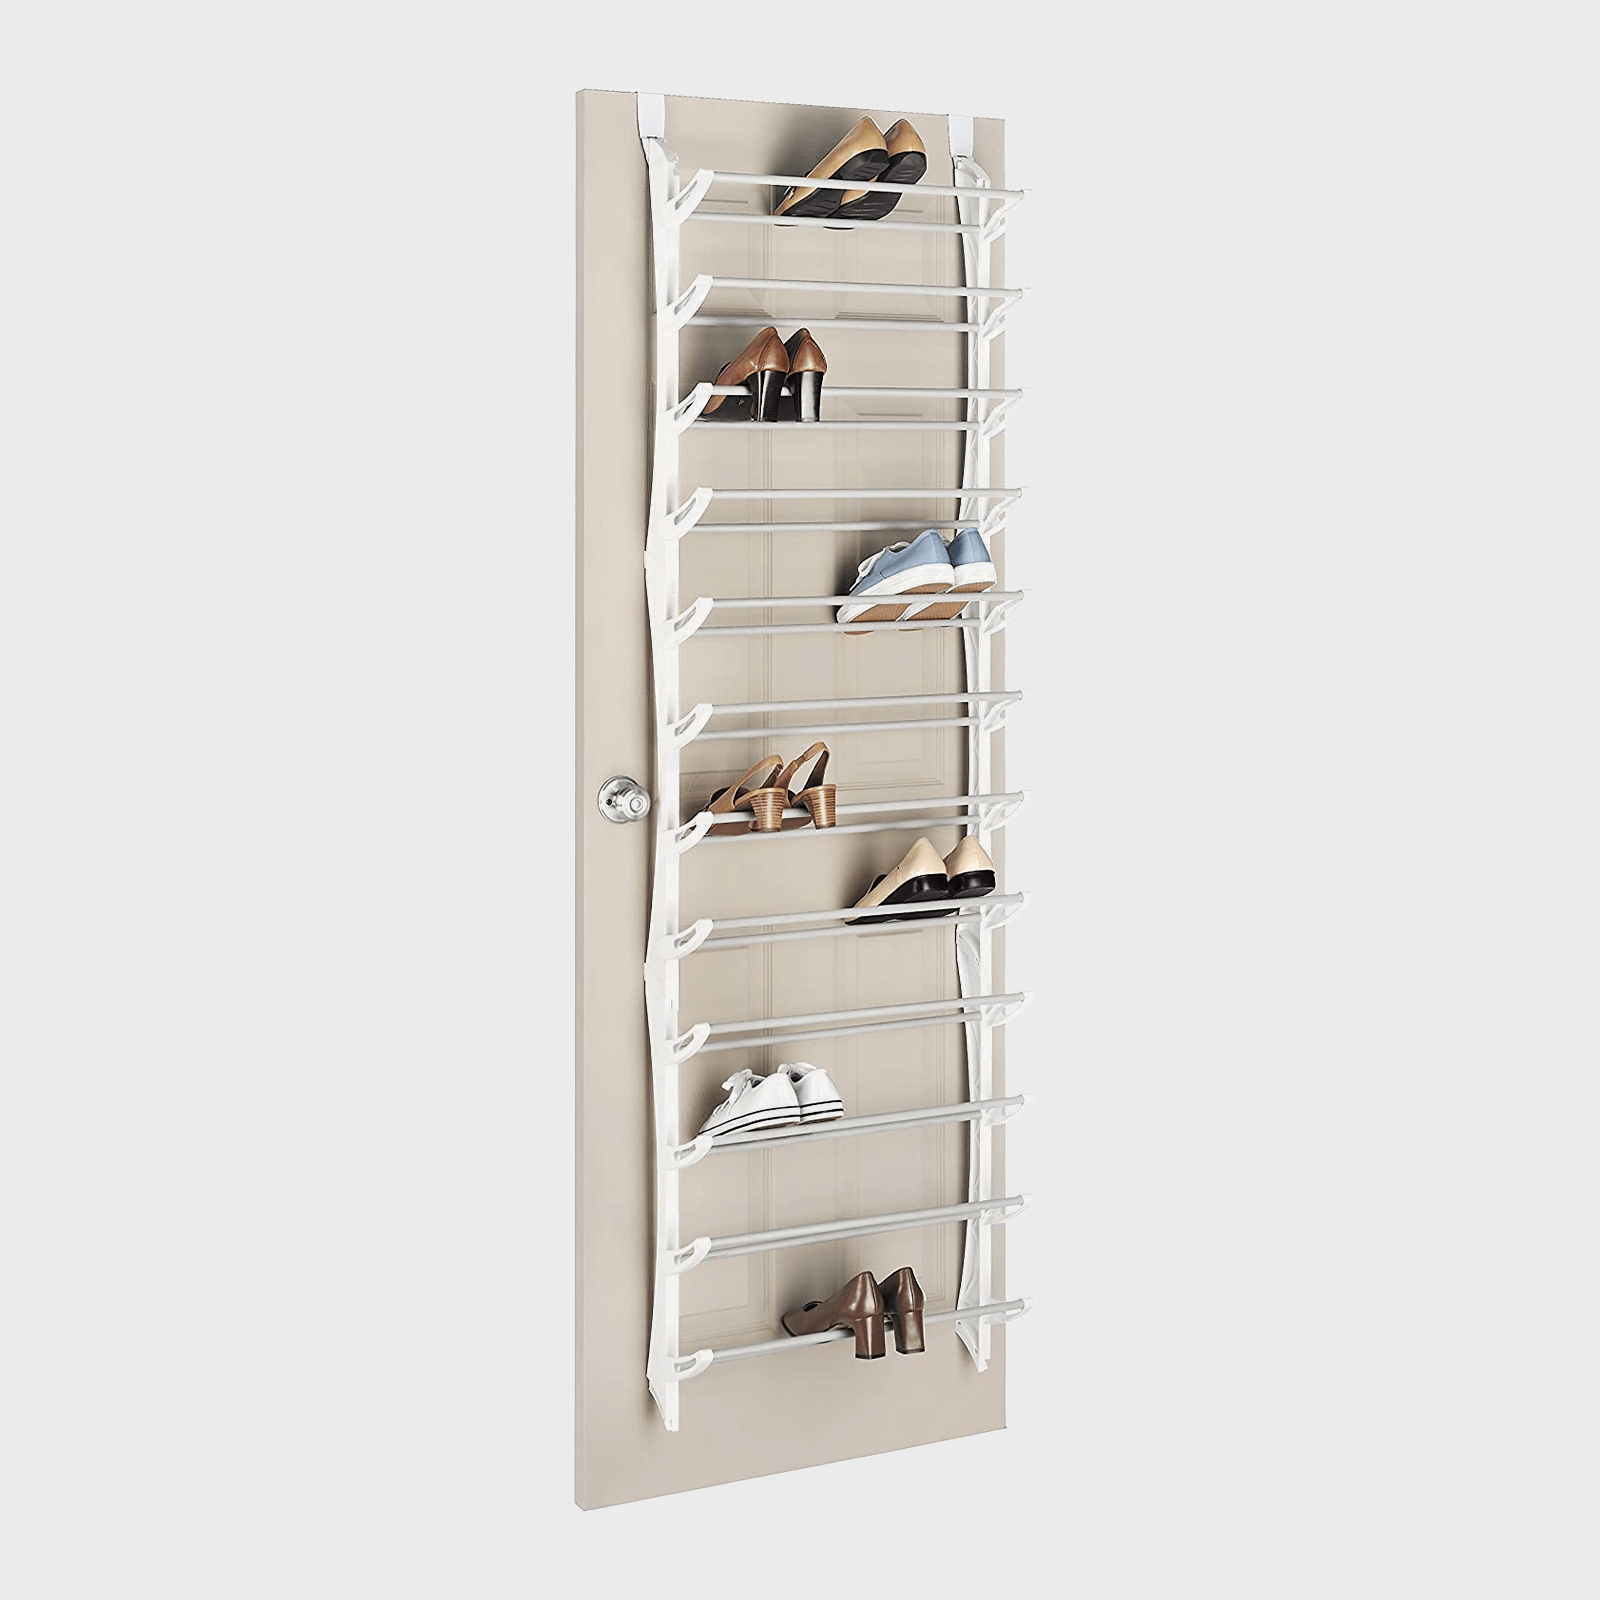 10 Best Shoe Cabinets in 2022 - Shoe Storage Cabinets & Organizers